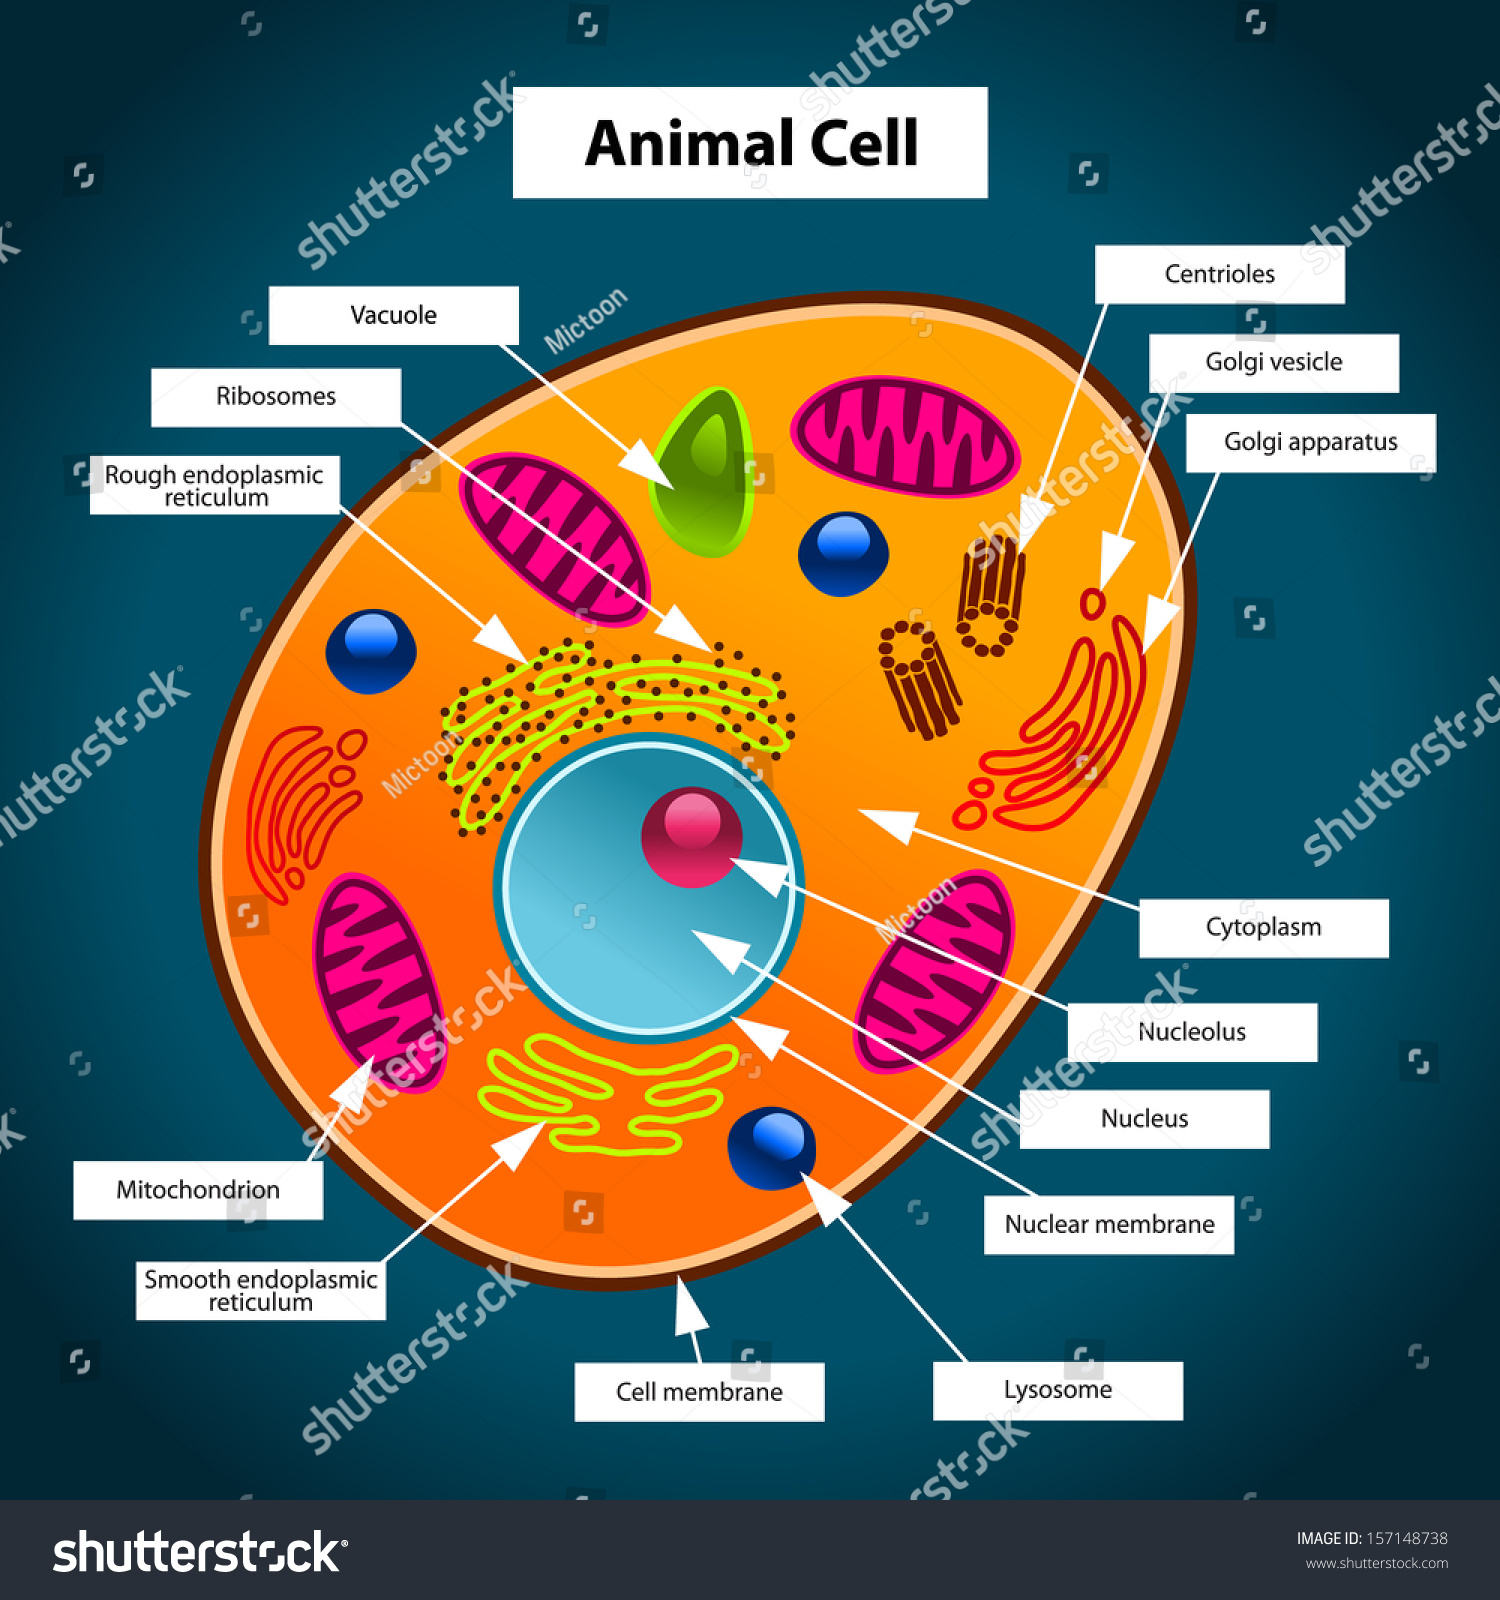 Color Illustration Of Animal Cell 157148738 Shutterstock